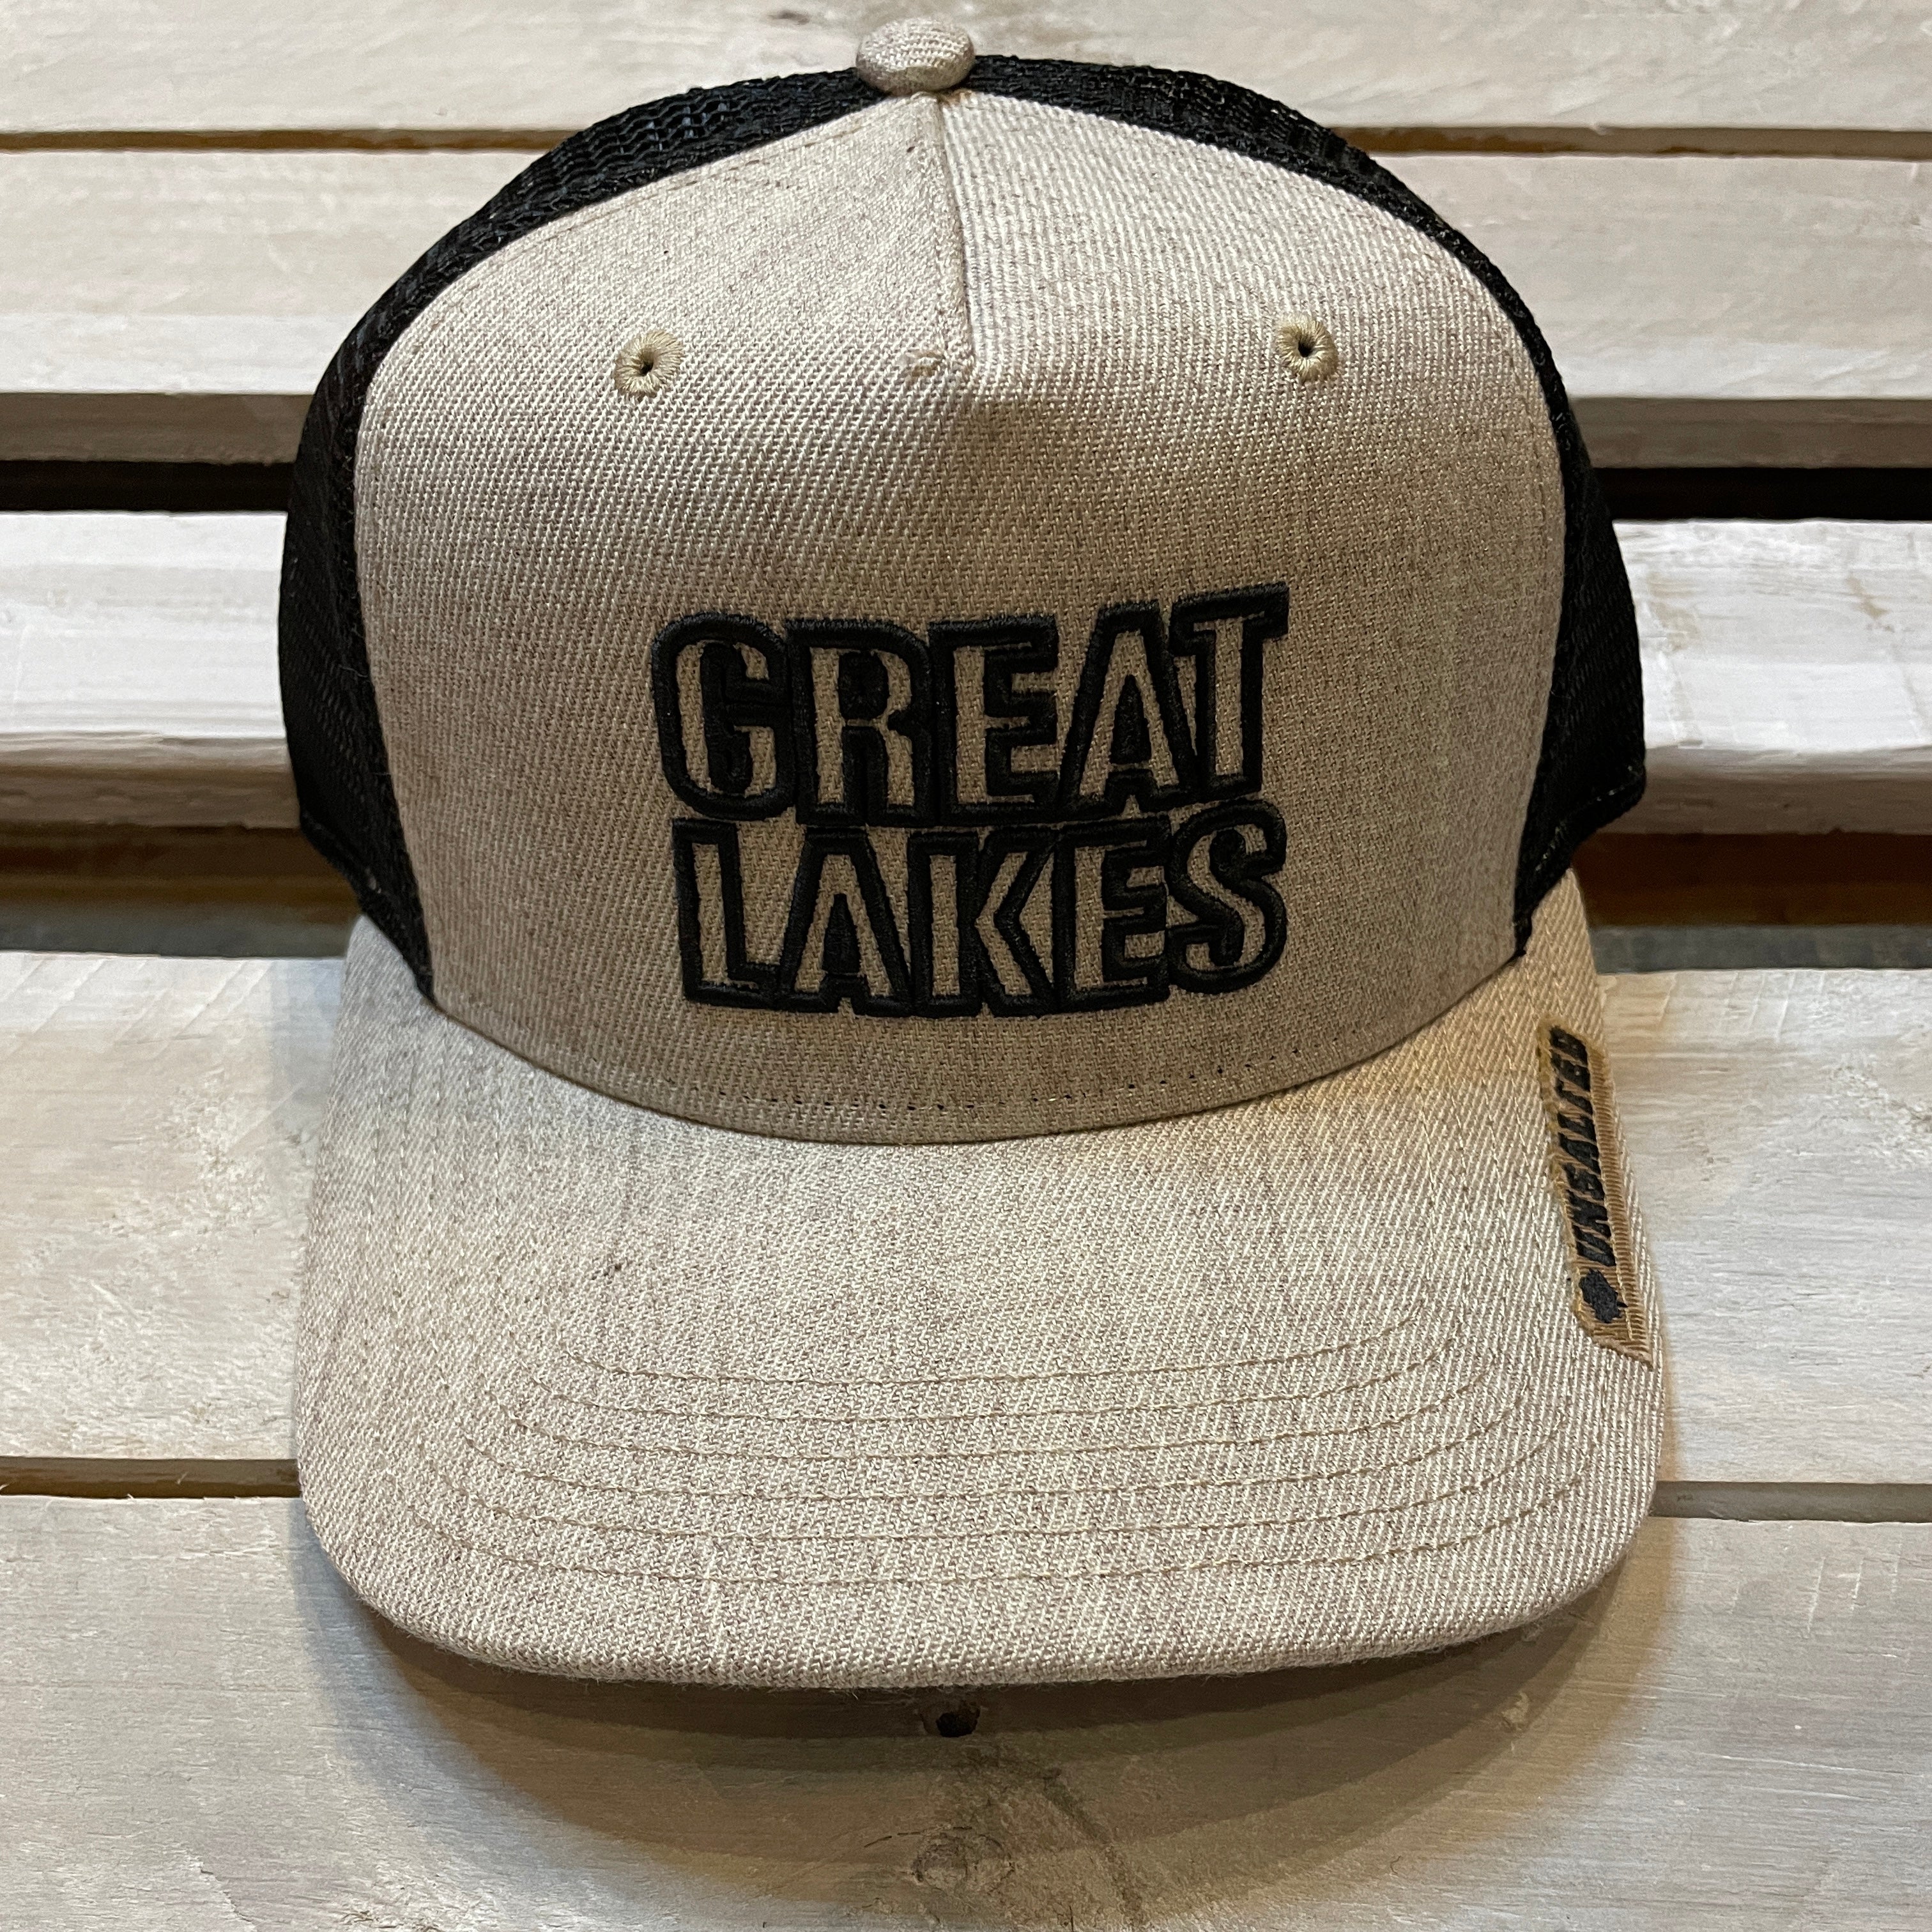 Great Lakes Outline Ball Cap